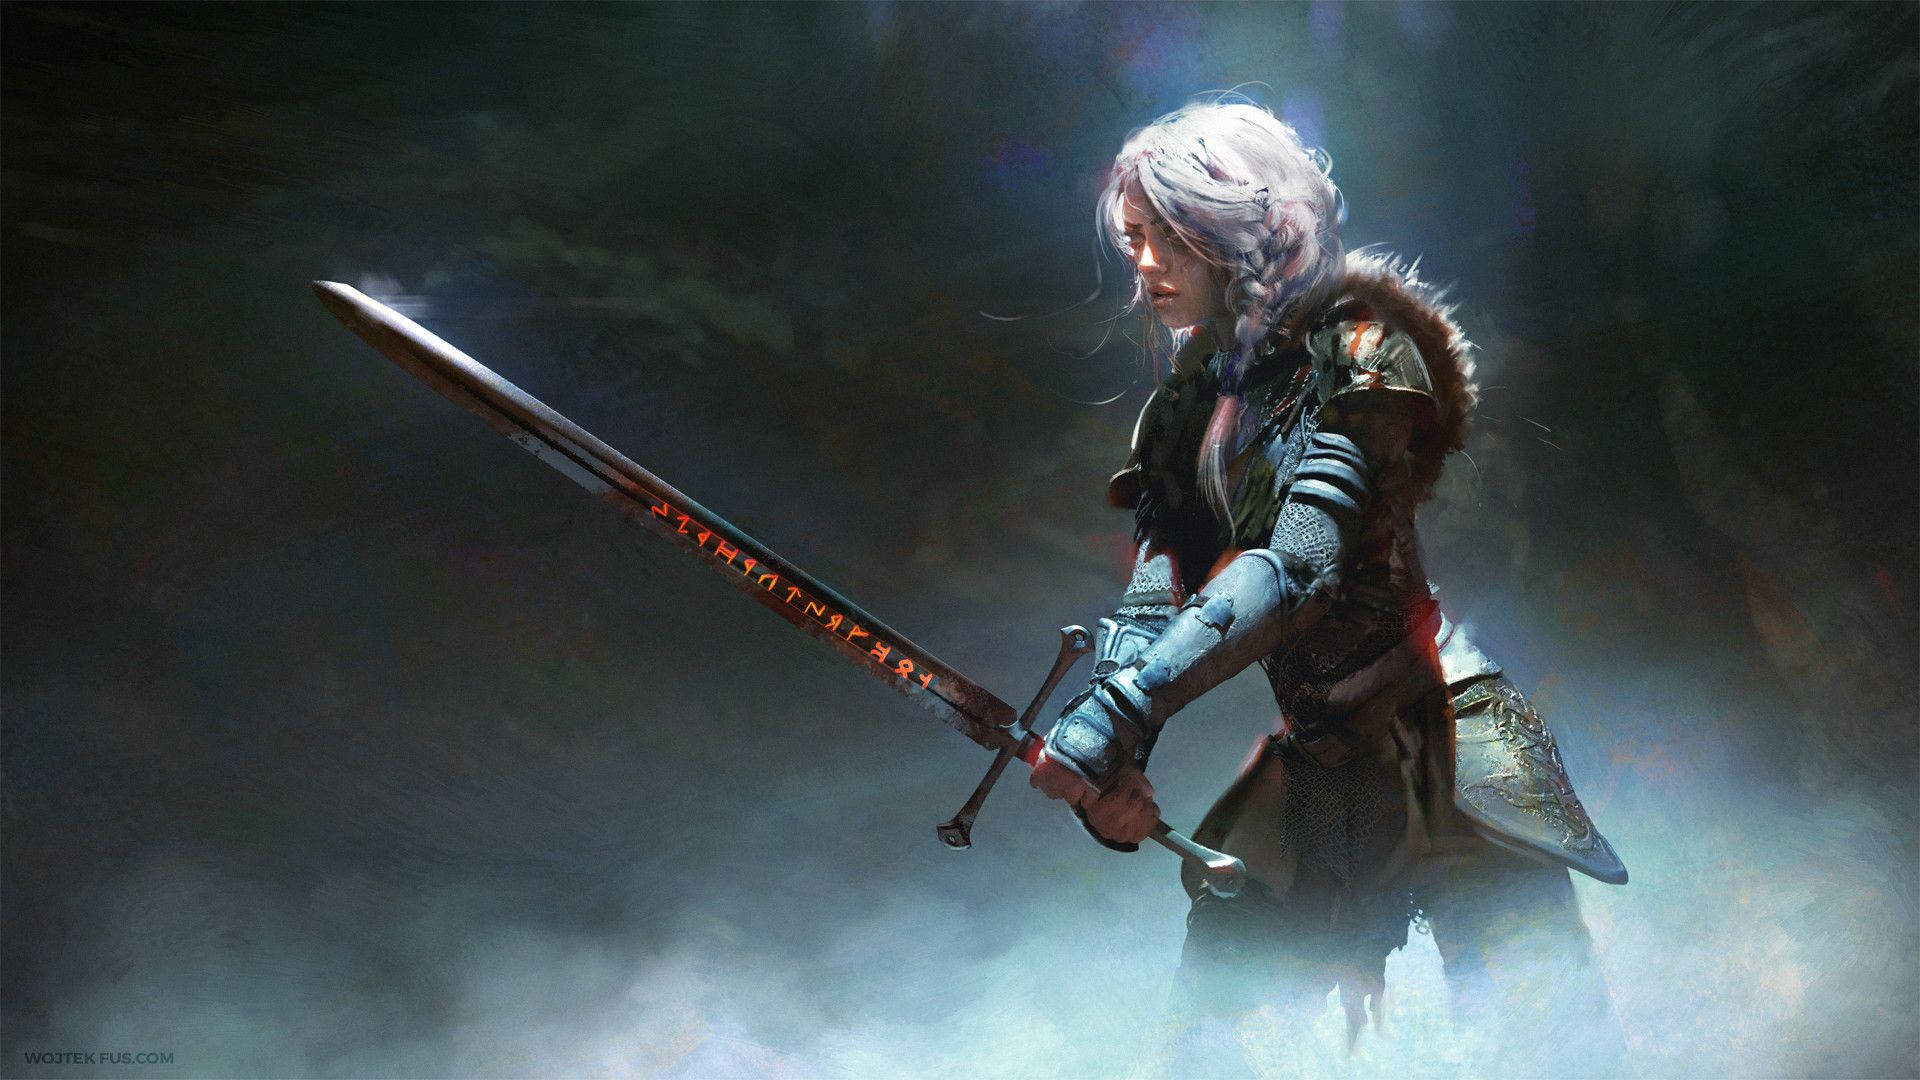 "Ciri of The Witcher 3 armed and prepared for battle." Wallpaper